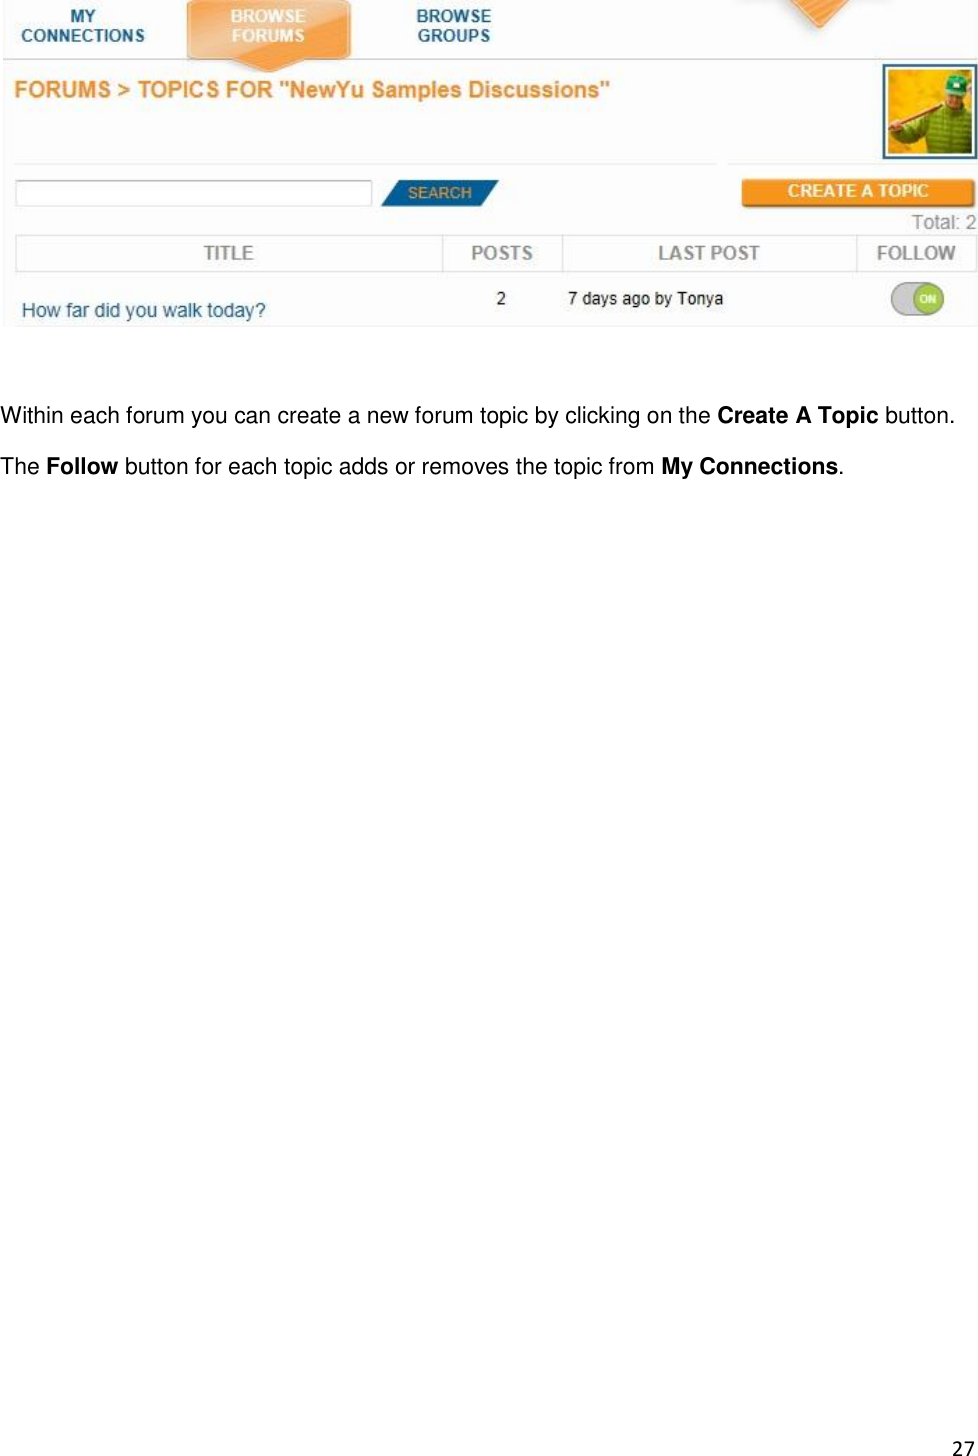 27   Within each forum you can create a new forum topic by clicking on the Create A Topic button. The Follow button for each topic adds or removes the topic from My Connections.                   